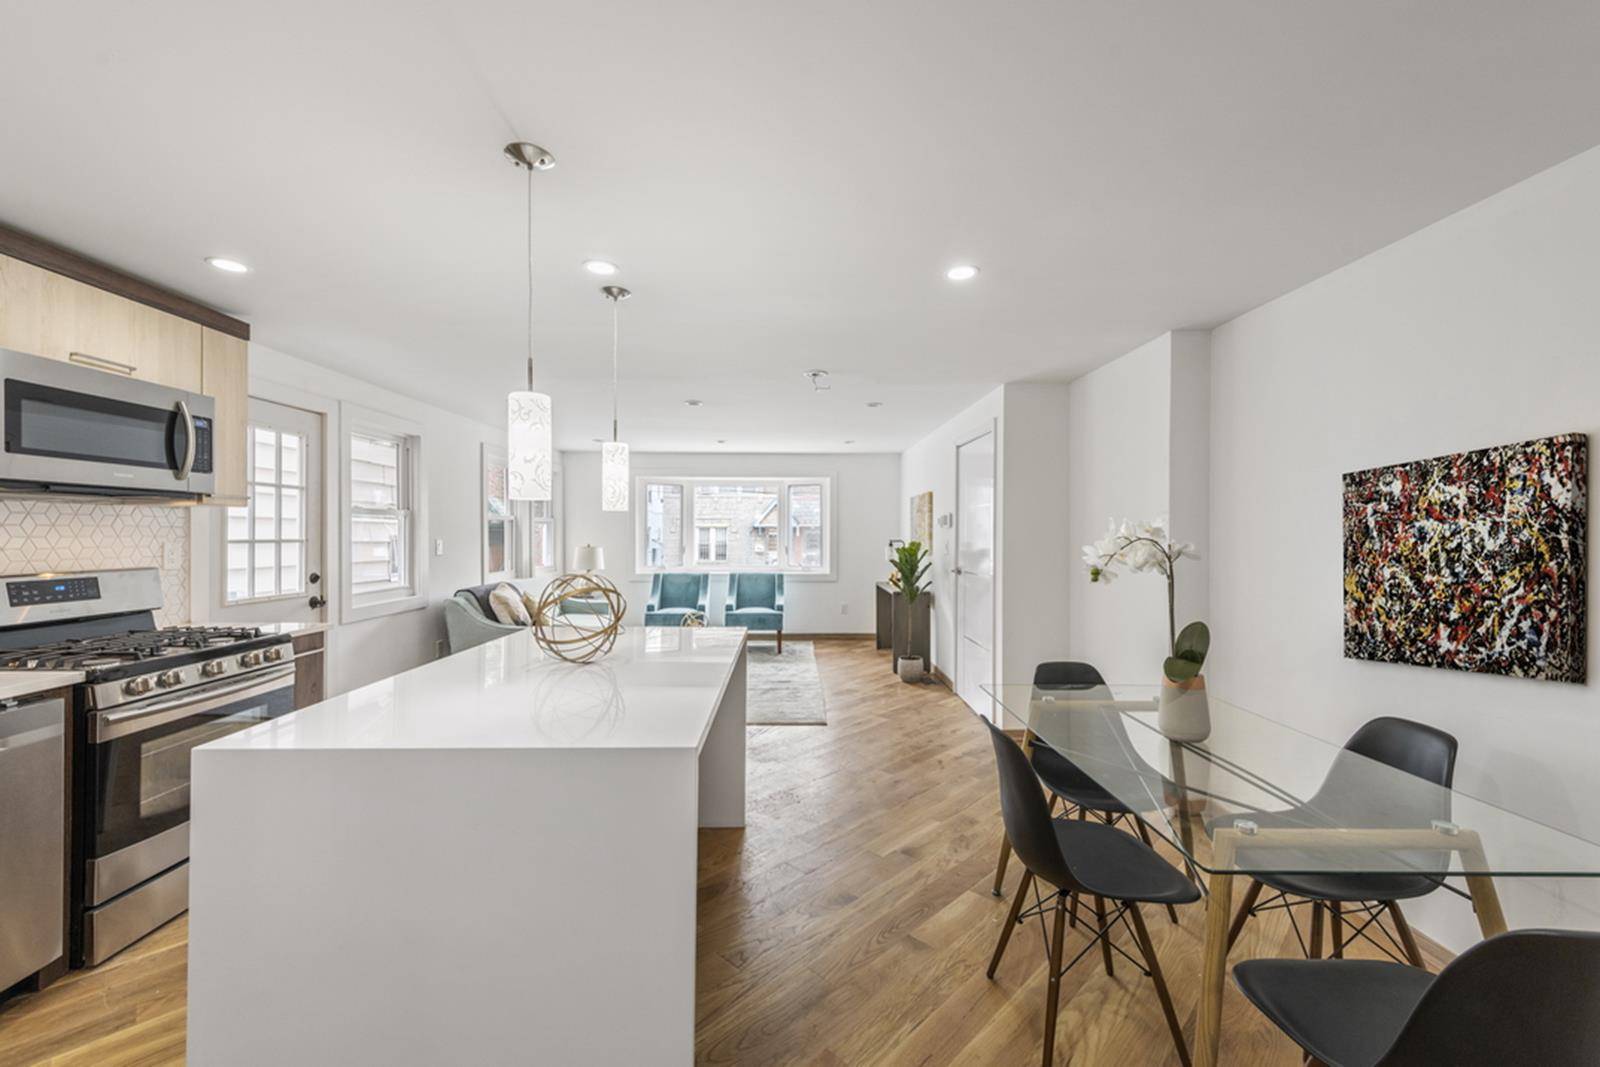 Nestled on a tree lined street in Woodside, Queens, 67 21 47th Ave is a fully detached 2 family house graced with an abundance of natural light and a thoughtful ...